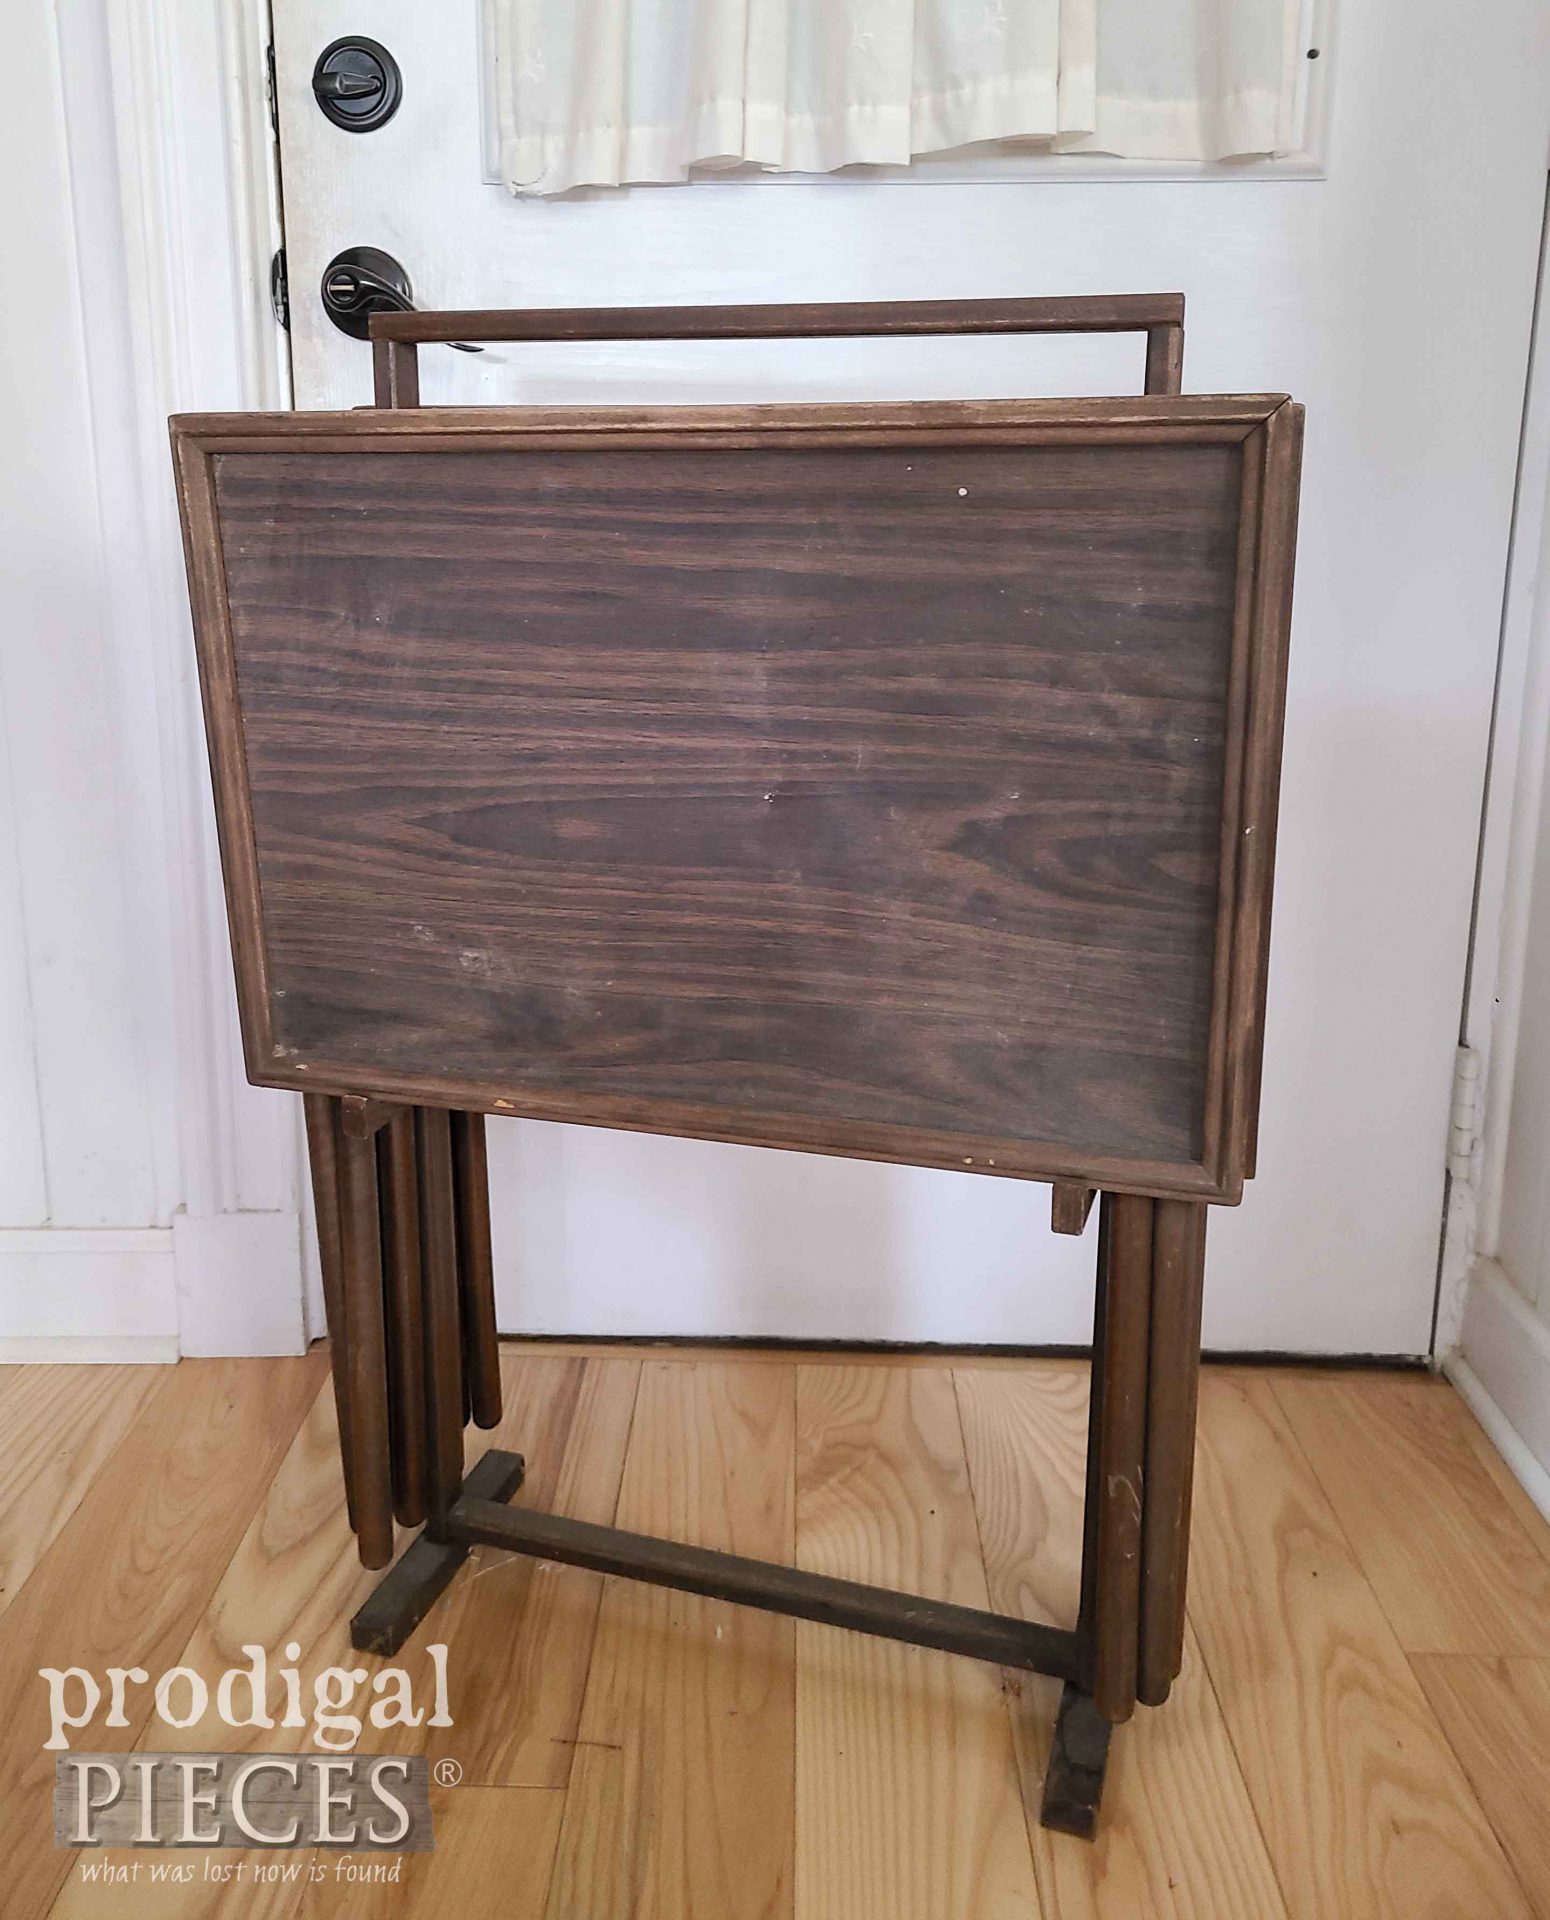 Vintage TV Trays Before Makeover by Larissa of Prodigal Pieces | prodigalpieces.com #prodigalpieces